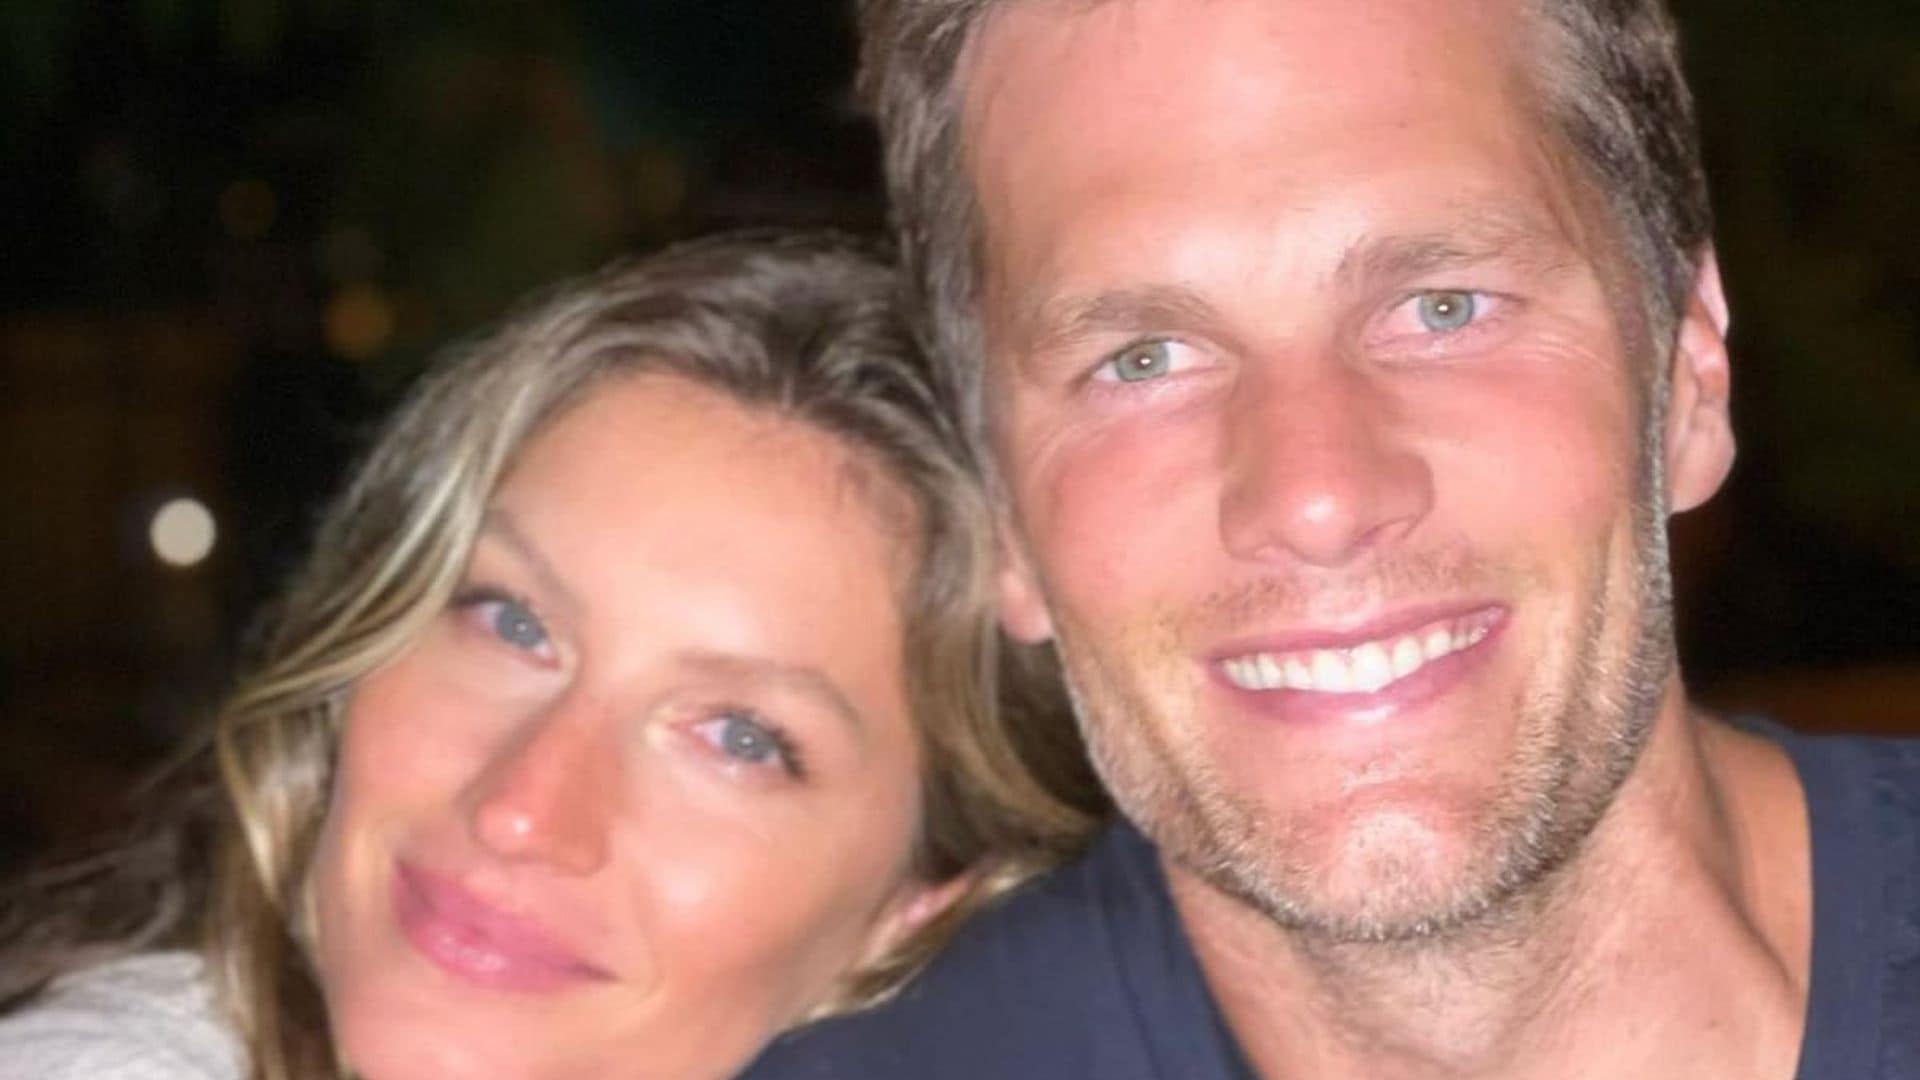 Gisele Bündchen wishes the ‘love of her life’ Tom Brady a happy birthday for his 44th